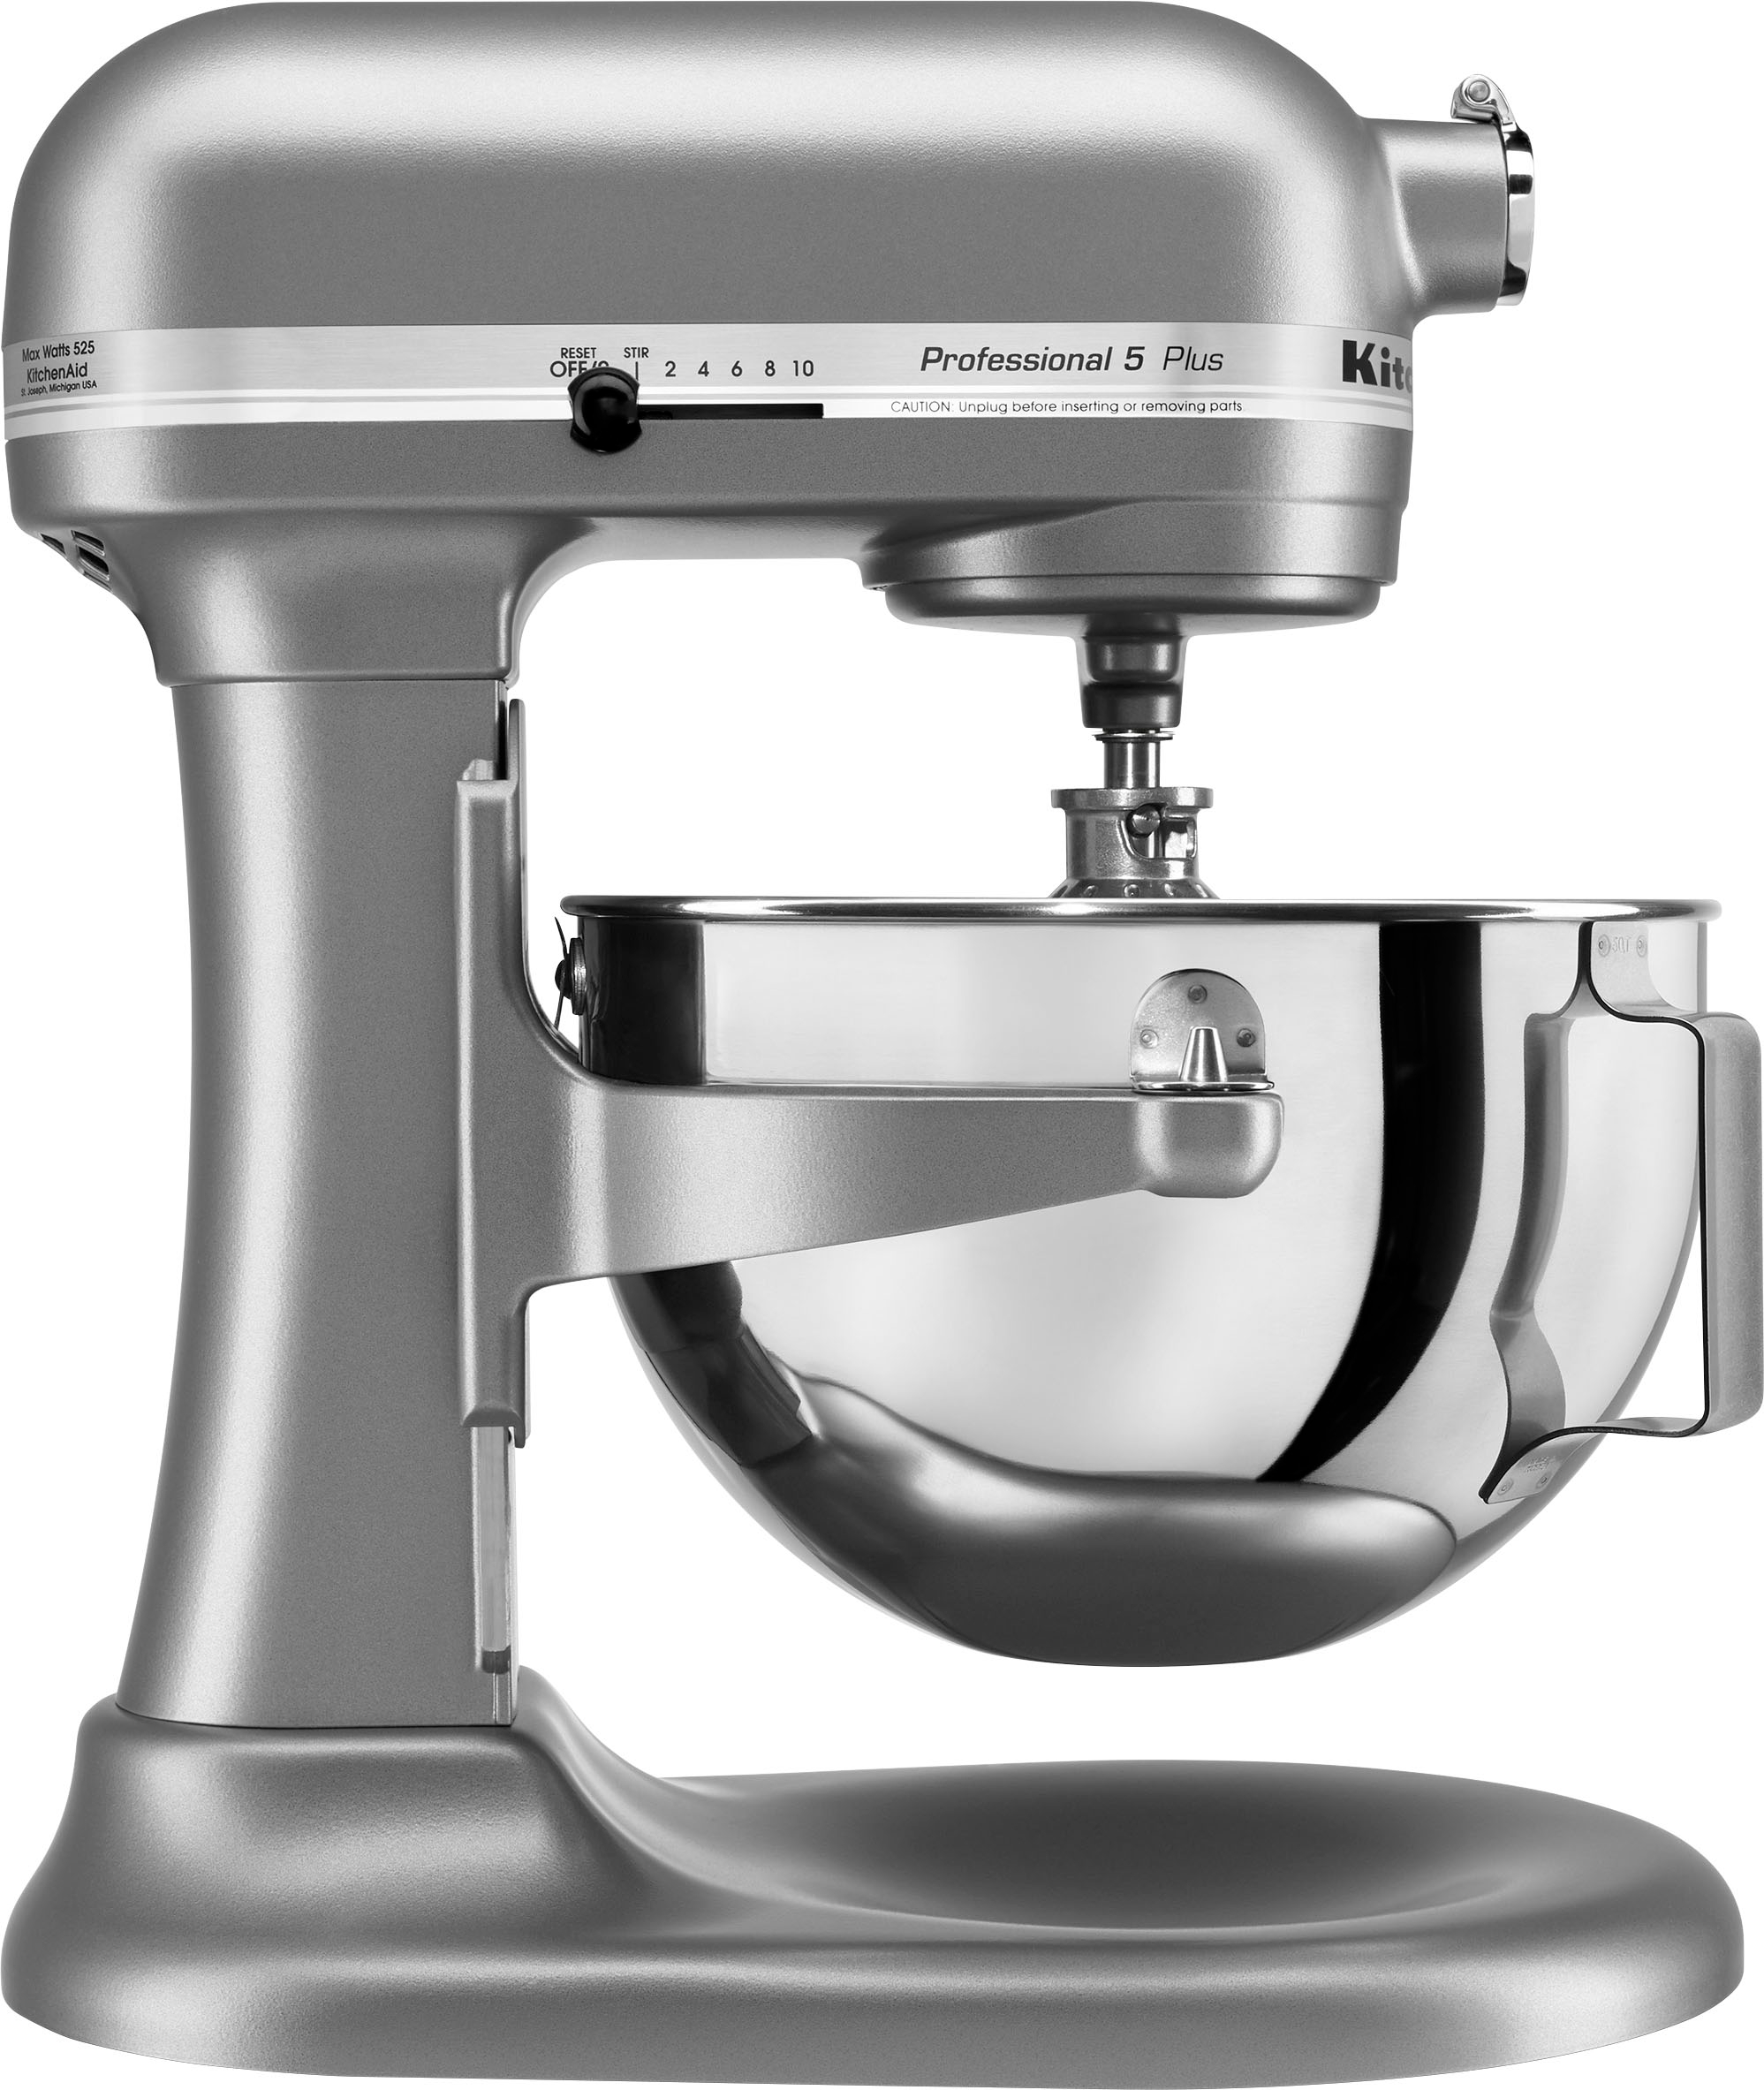 Image result for kitchenaid professional mixer